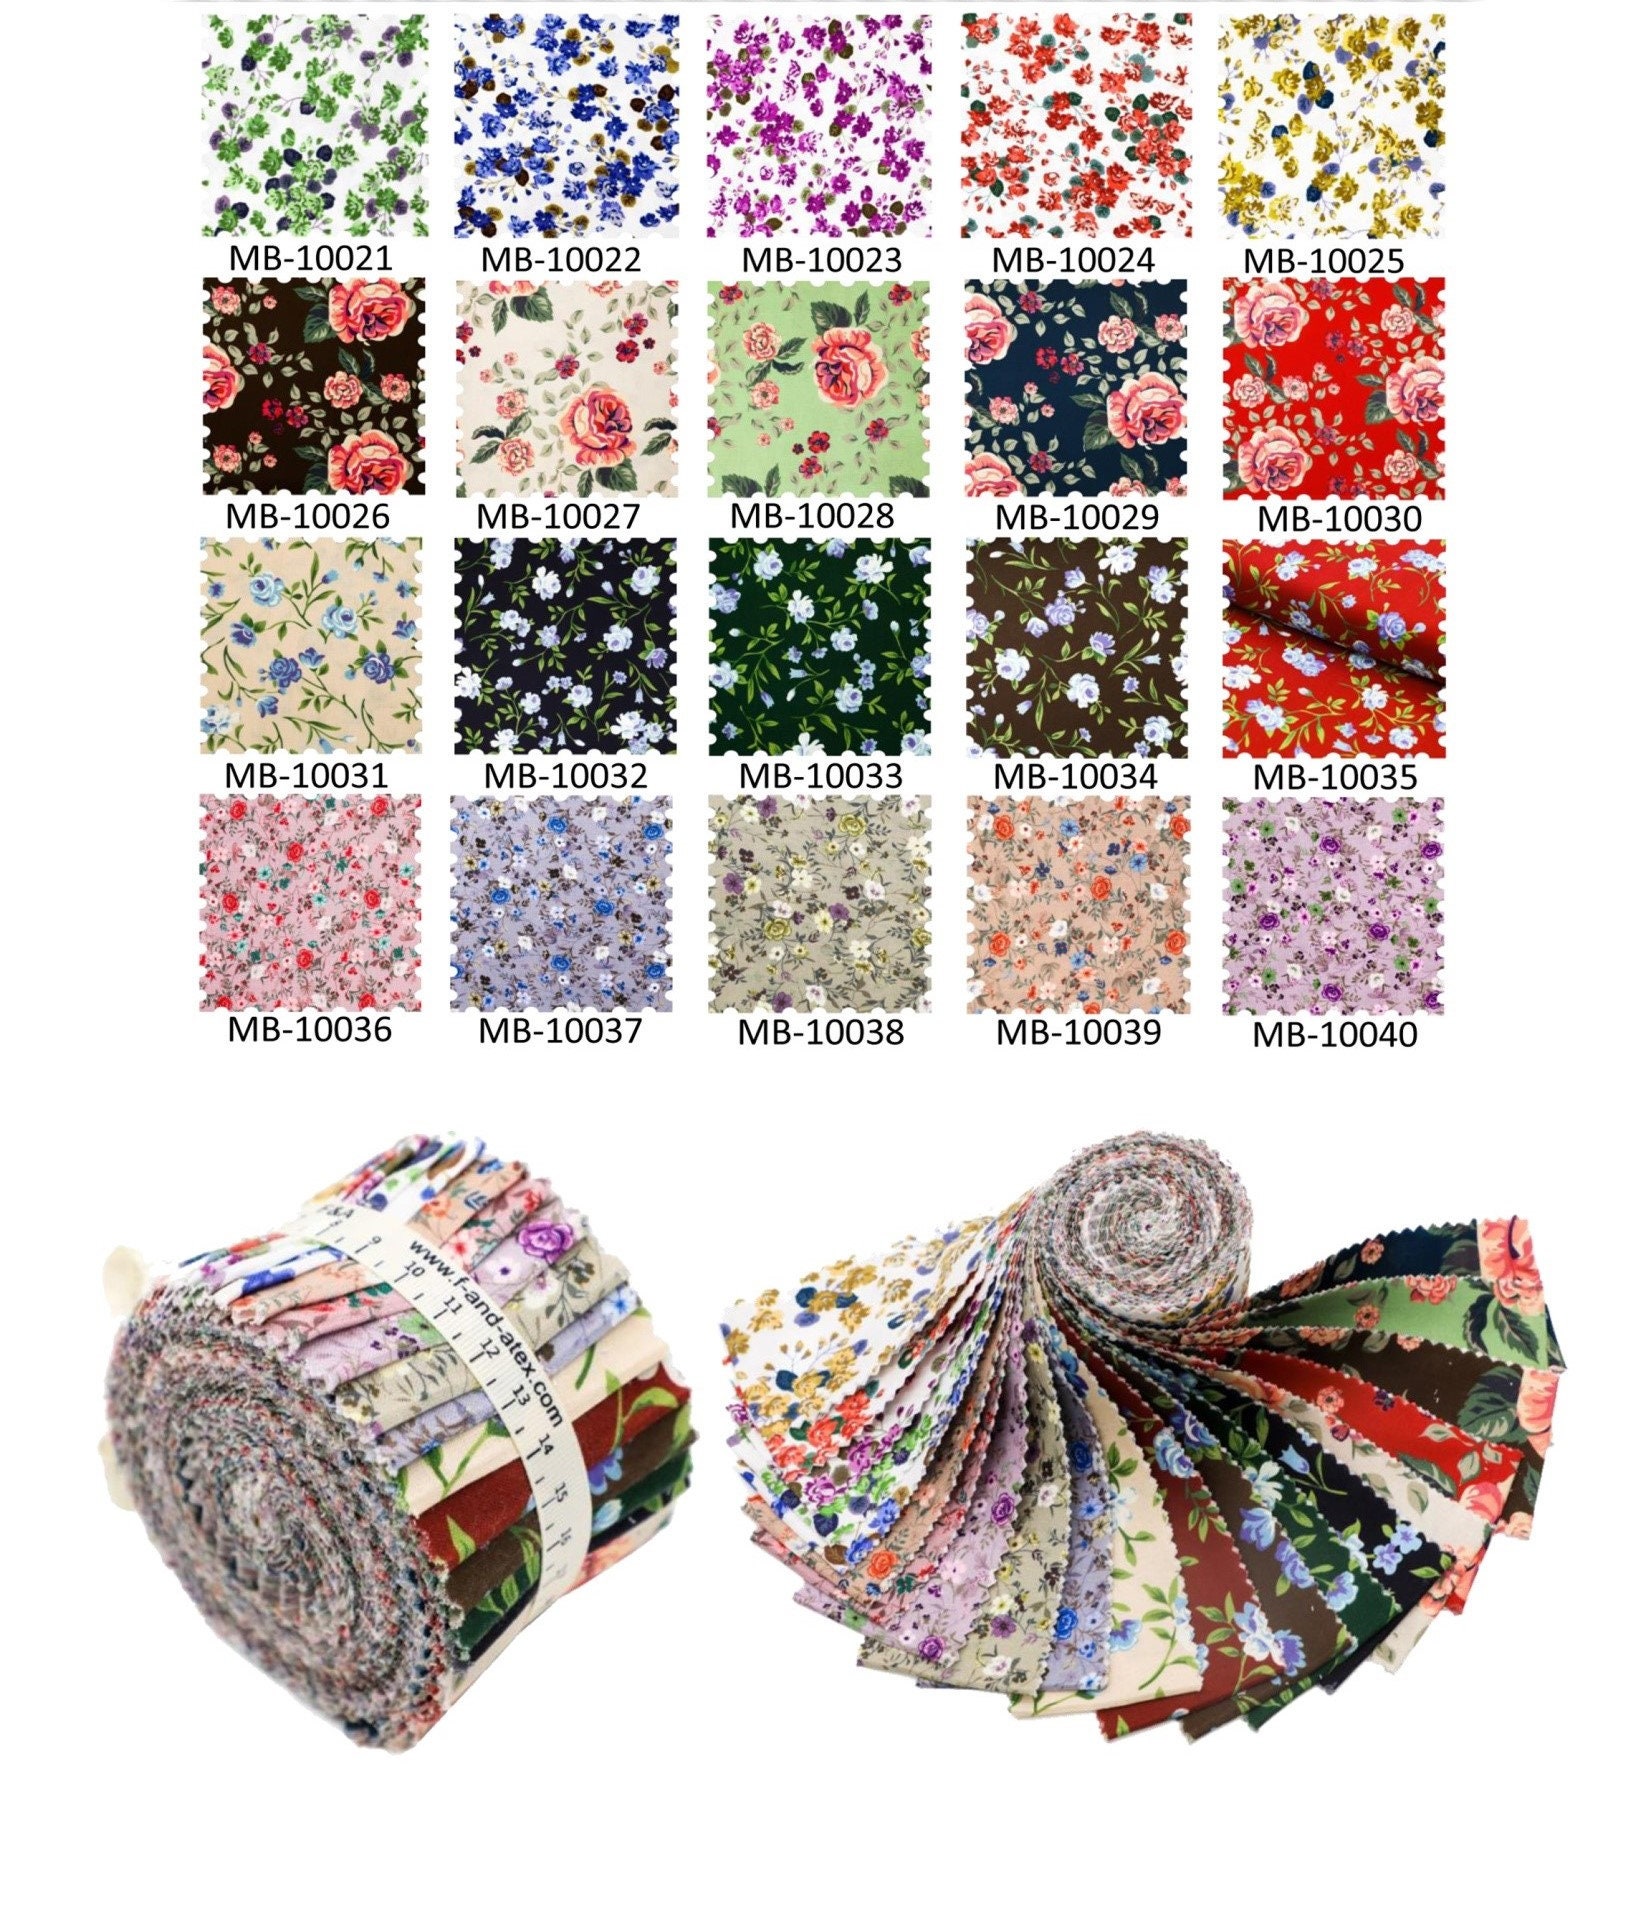 Craftsfabrics 20pcs 2.5'' Floral Jelly Rolls Fabric Strips 100% Cotton  Precut Fabric for Quilting, Scrapbooking, Sewing, Crafts, Patchwork 